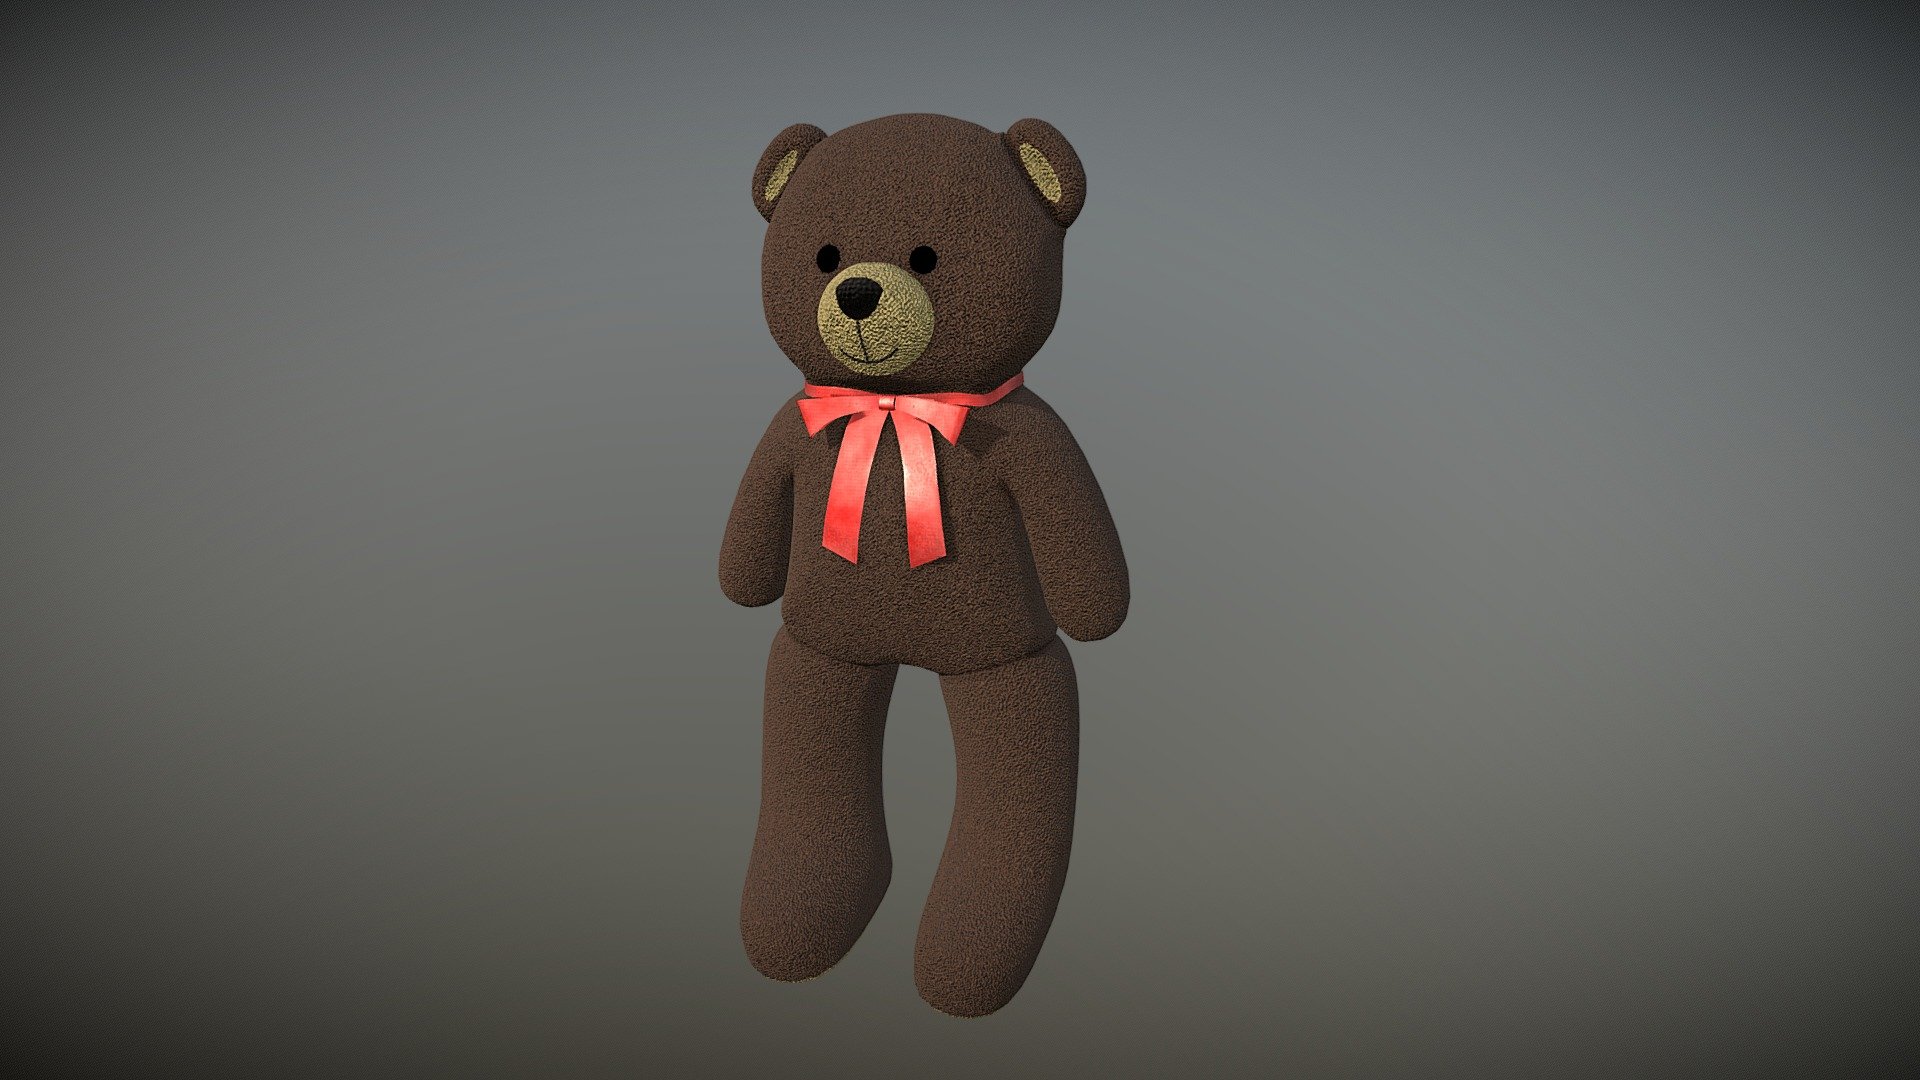 A 3D model of a teddy bear. 
Modelled in Autodesk Maya 2023
polycount: 4.6k
Textured in Substance painter at 1k - Teddy bear - 3D model by tobycrome 3d model